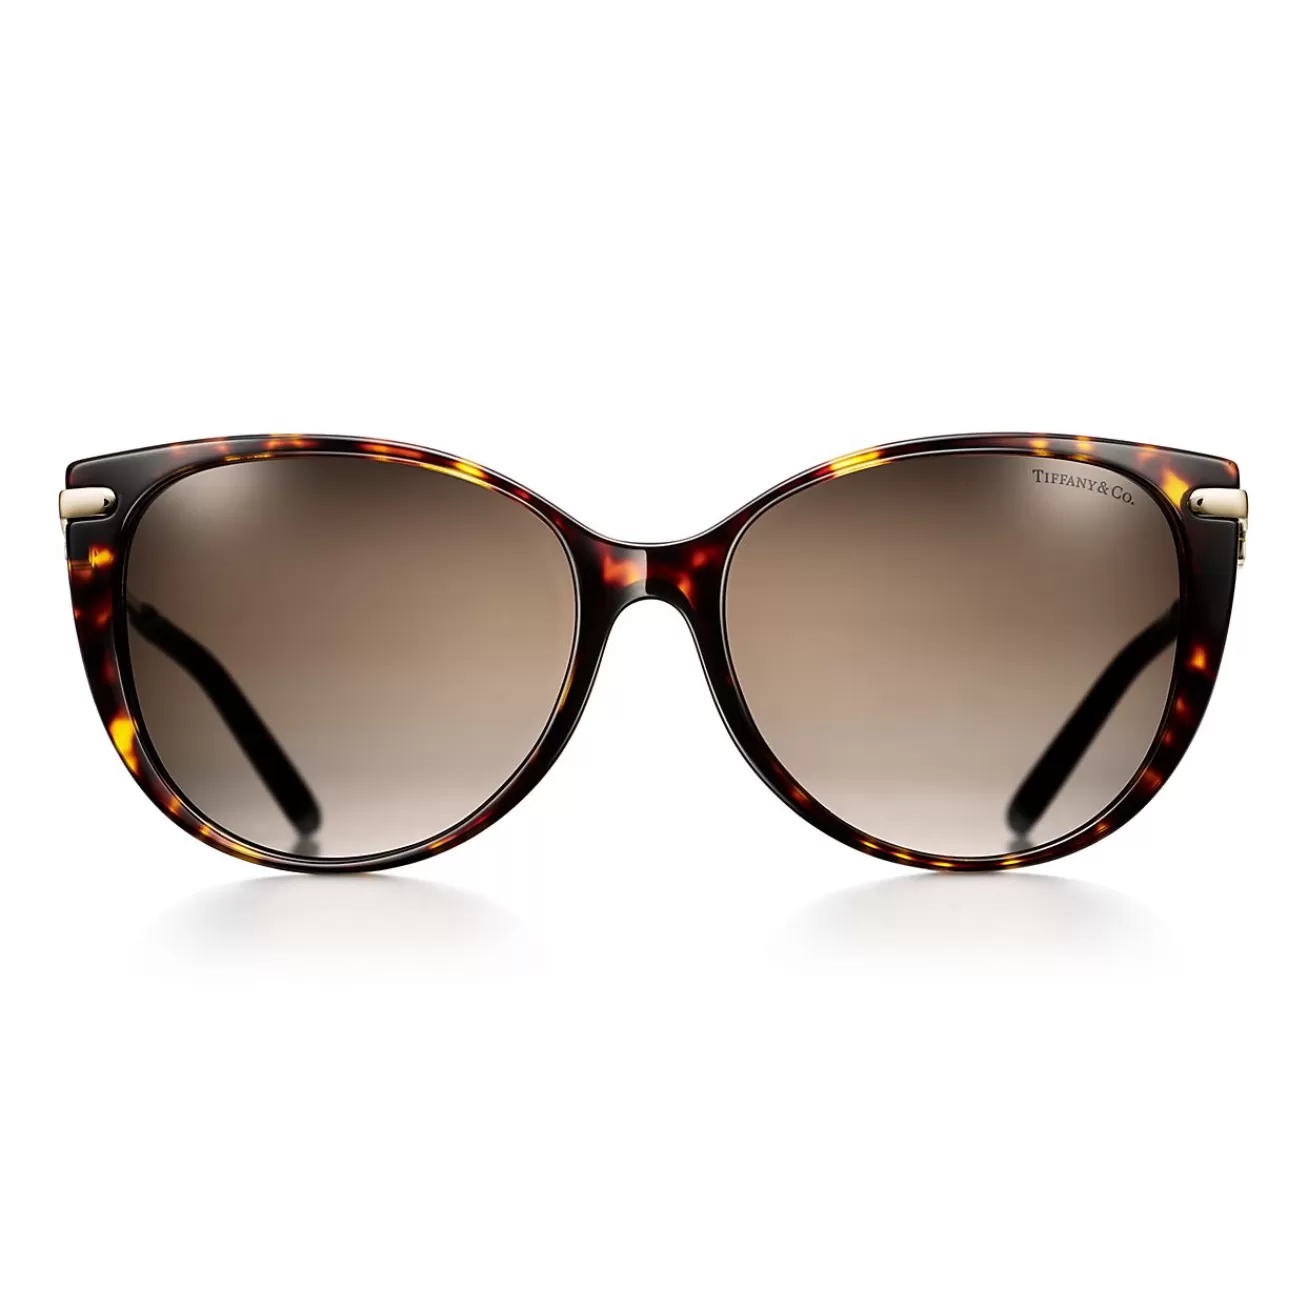 Tiffany & Co. Tiffany T Cat Eye Sunglasses in Tortoise Acetate with Mother-of-pearl | ^ Tiffany T | Sunglasses